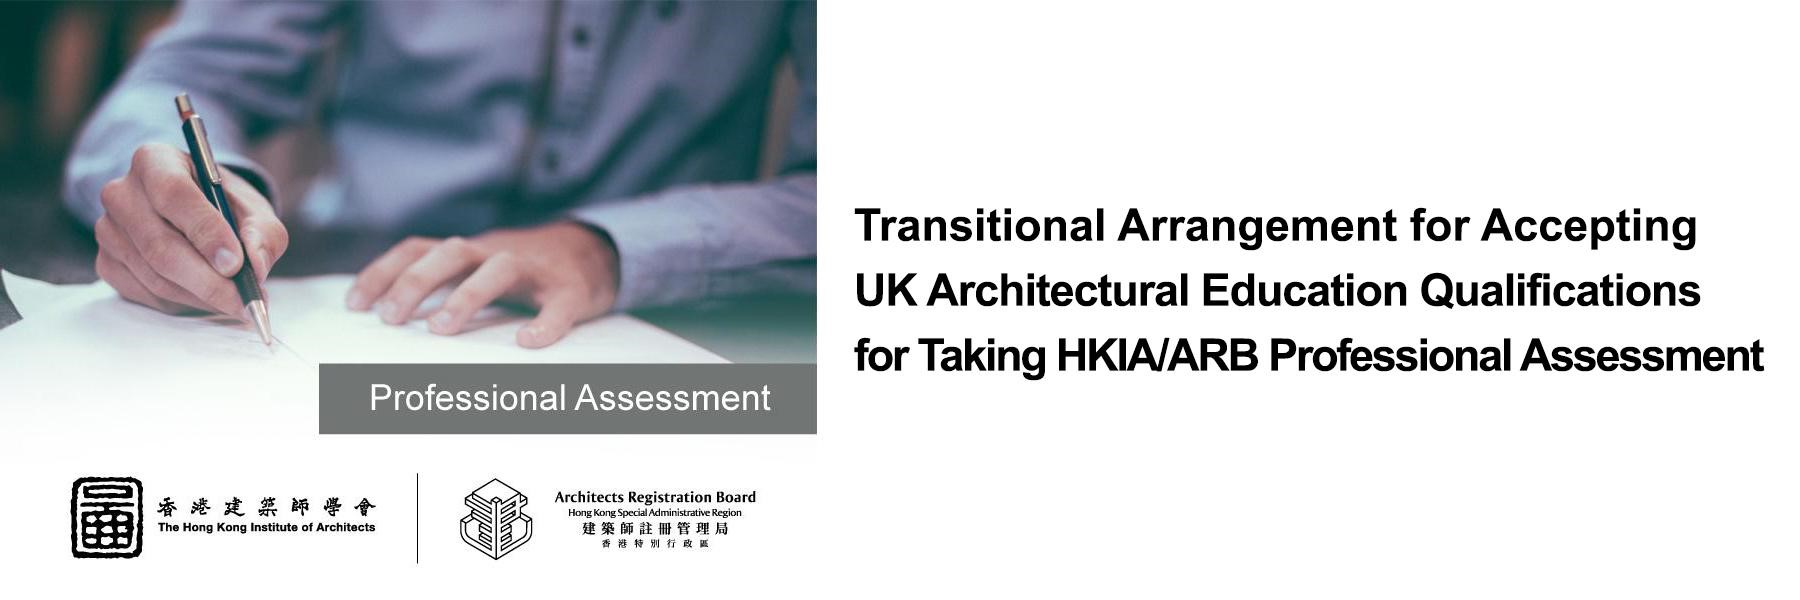 Transitional Measures for Recognising UK Architectural Educational Qualifications as Eligibility for Taking Professional Assessment in Hong Kong